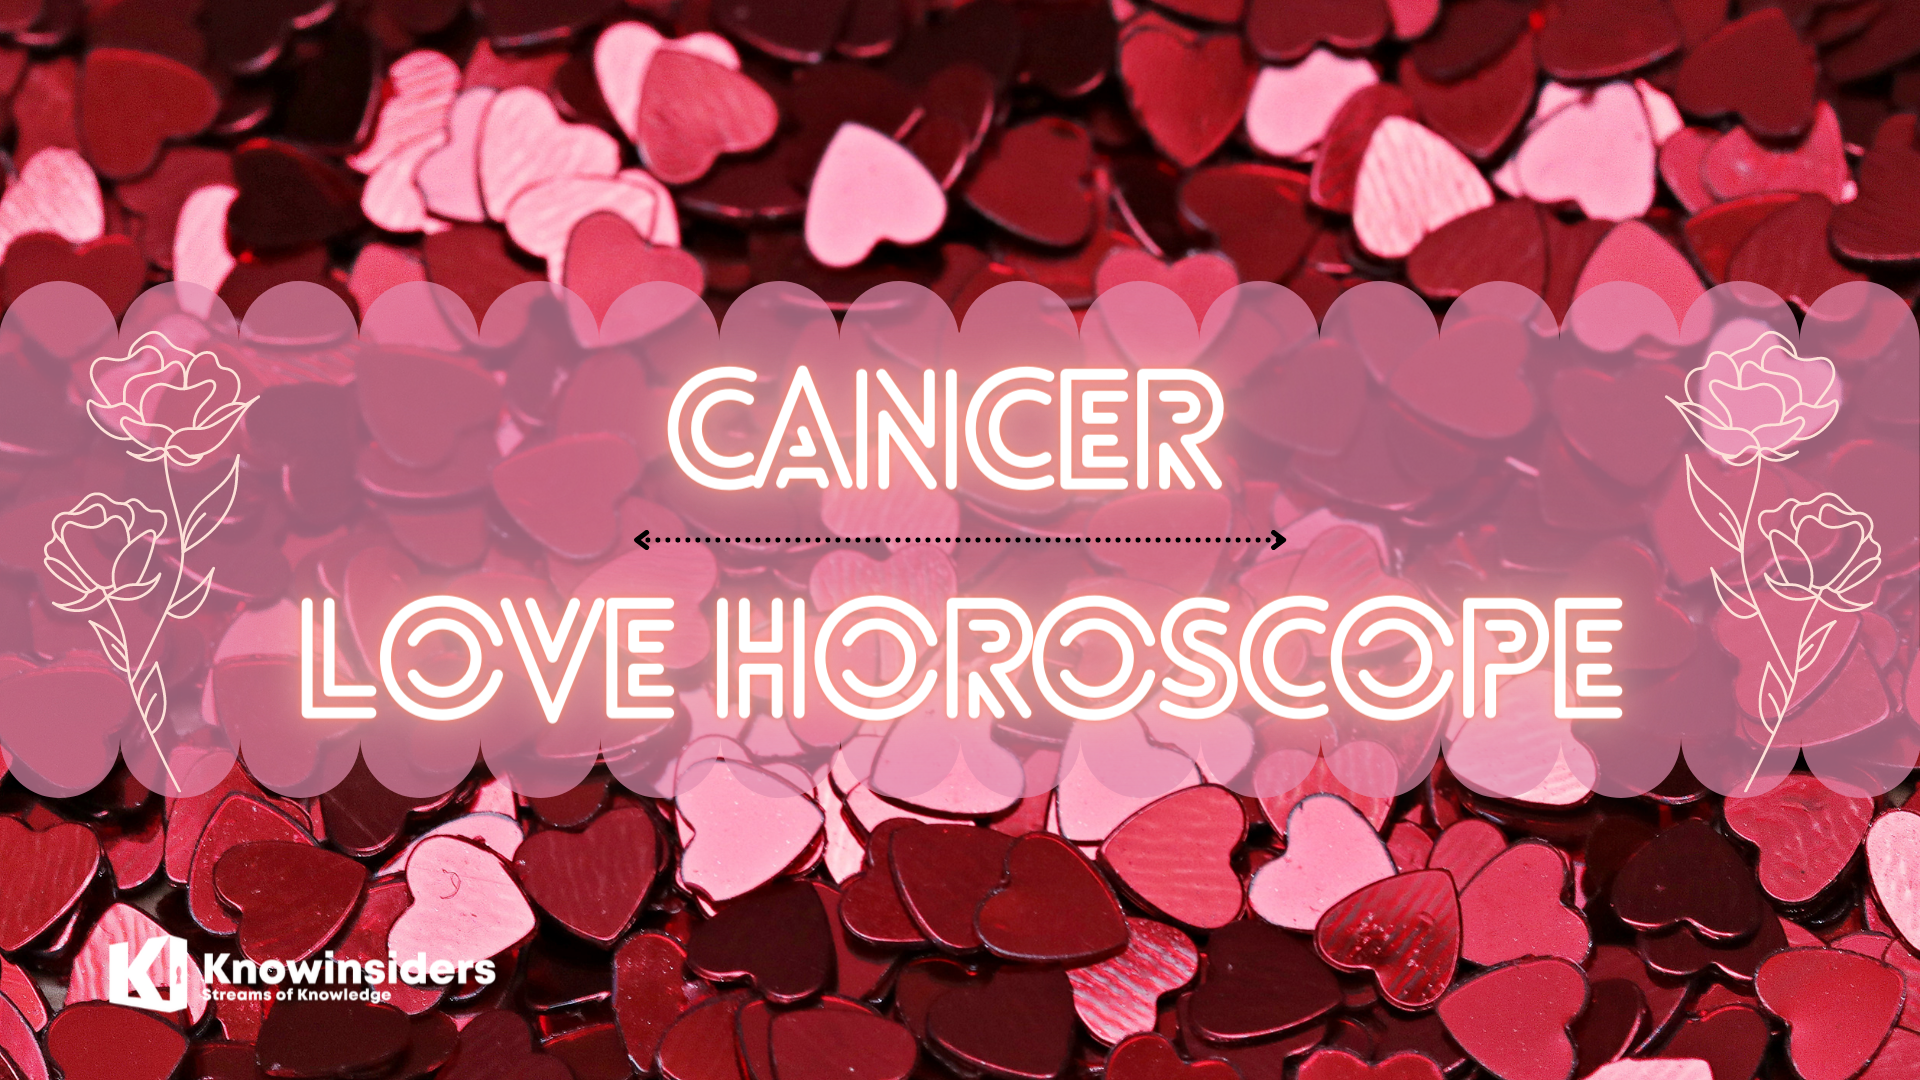 CANCER Horoscope: Prediction for Love, Relationship For Life